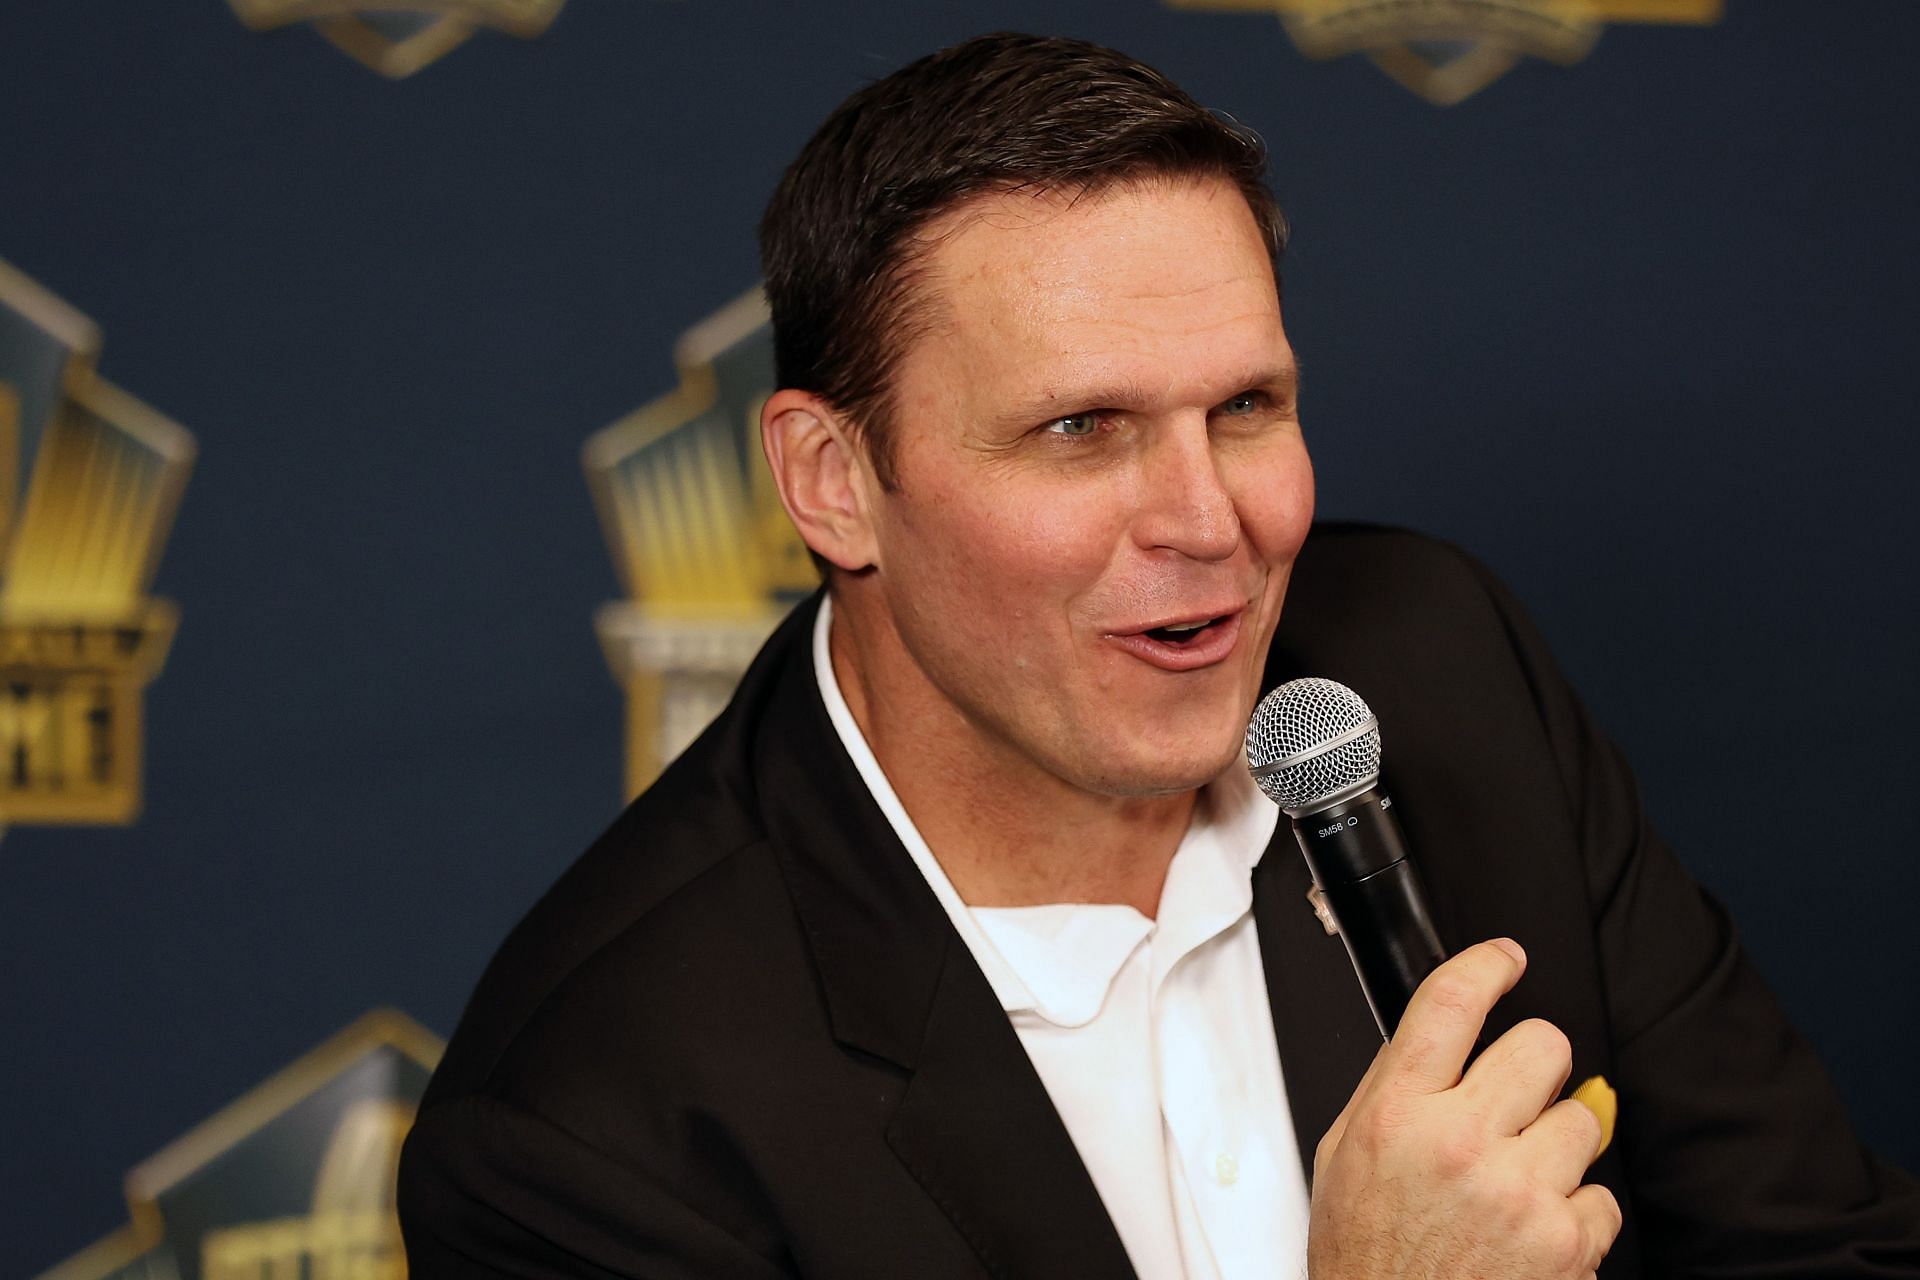 Hall of Fame offensive tackle Tony Boselli